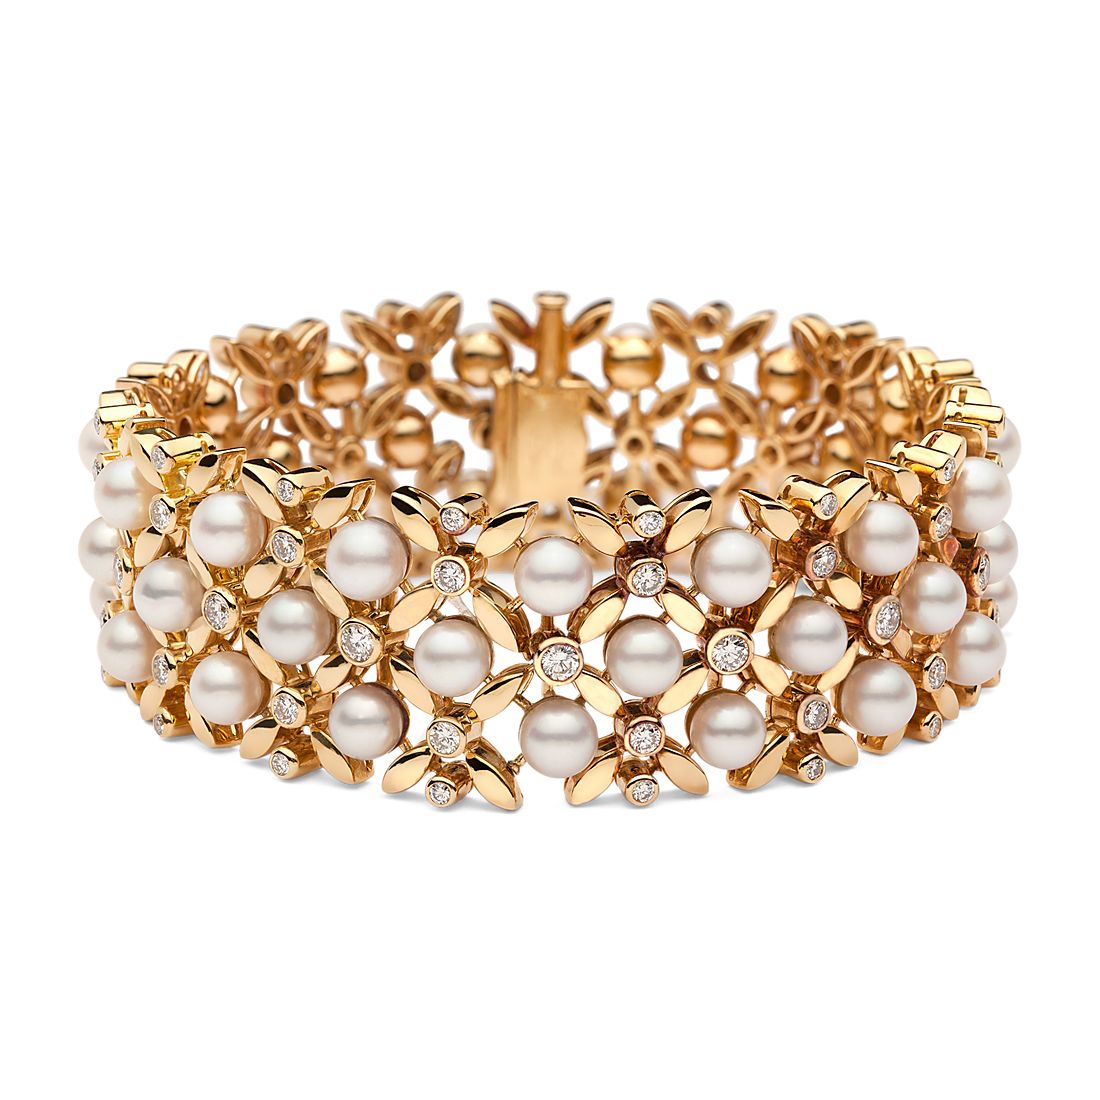 Estate Vintage Akoya Cultured Pearl and Diamond Bracelet in 18k Yellow Gold (2.37 ct. tw.)